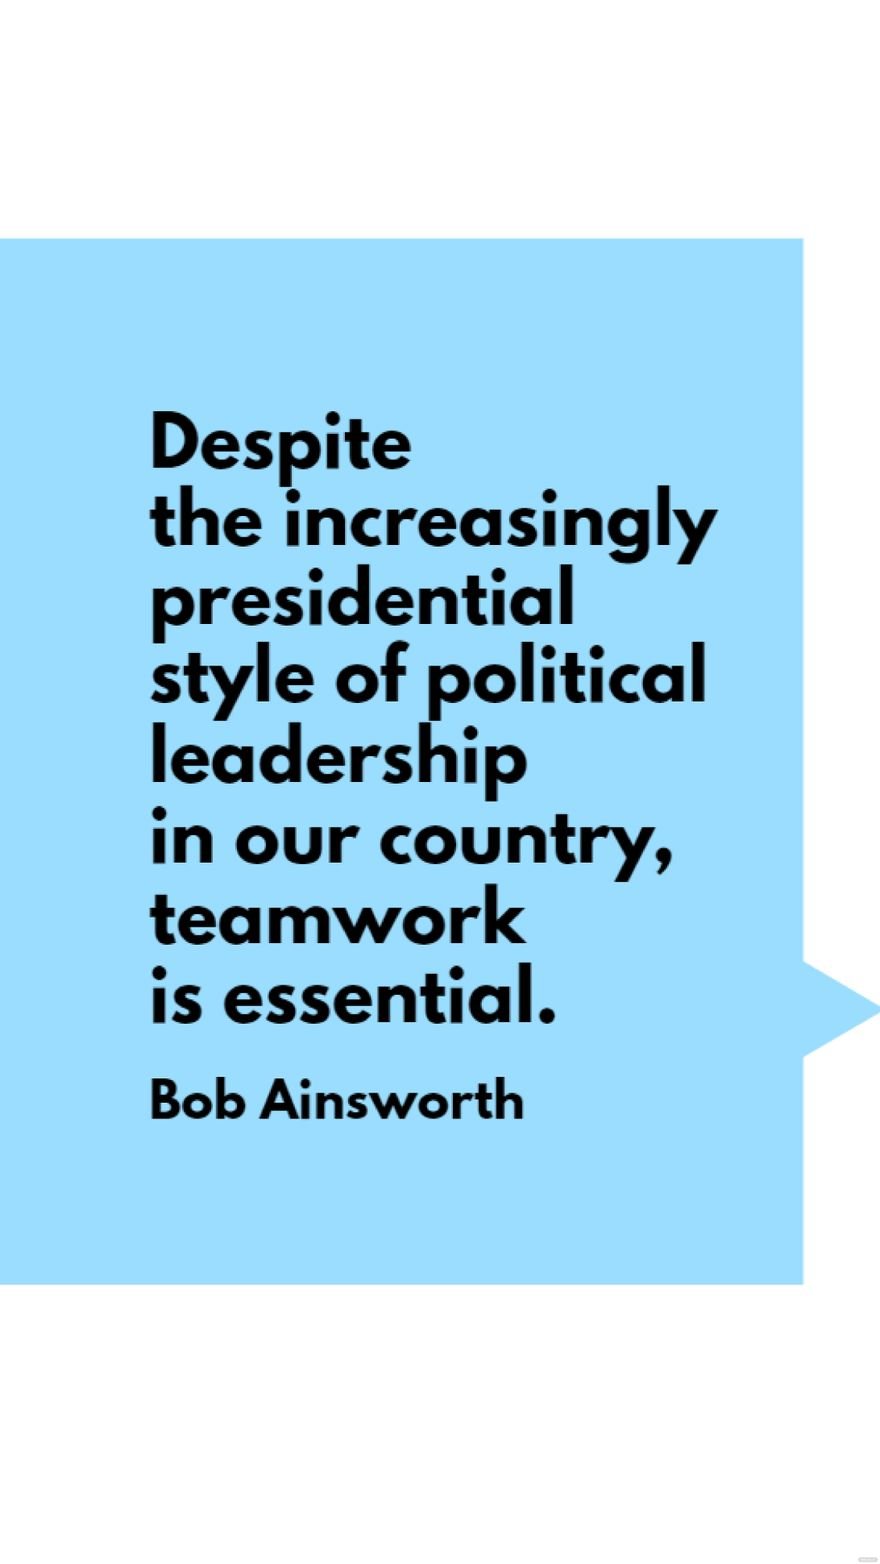 Bob Ainsworth - Despite the increasingly presidential style of political leadership in our country, teamwork is essential. in JPG